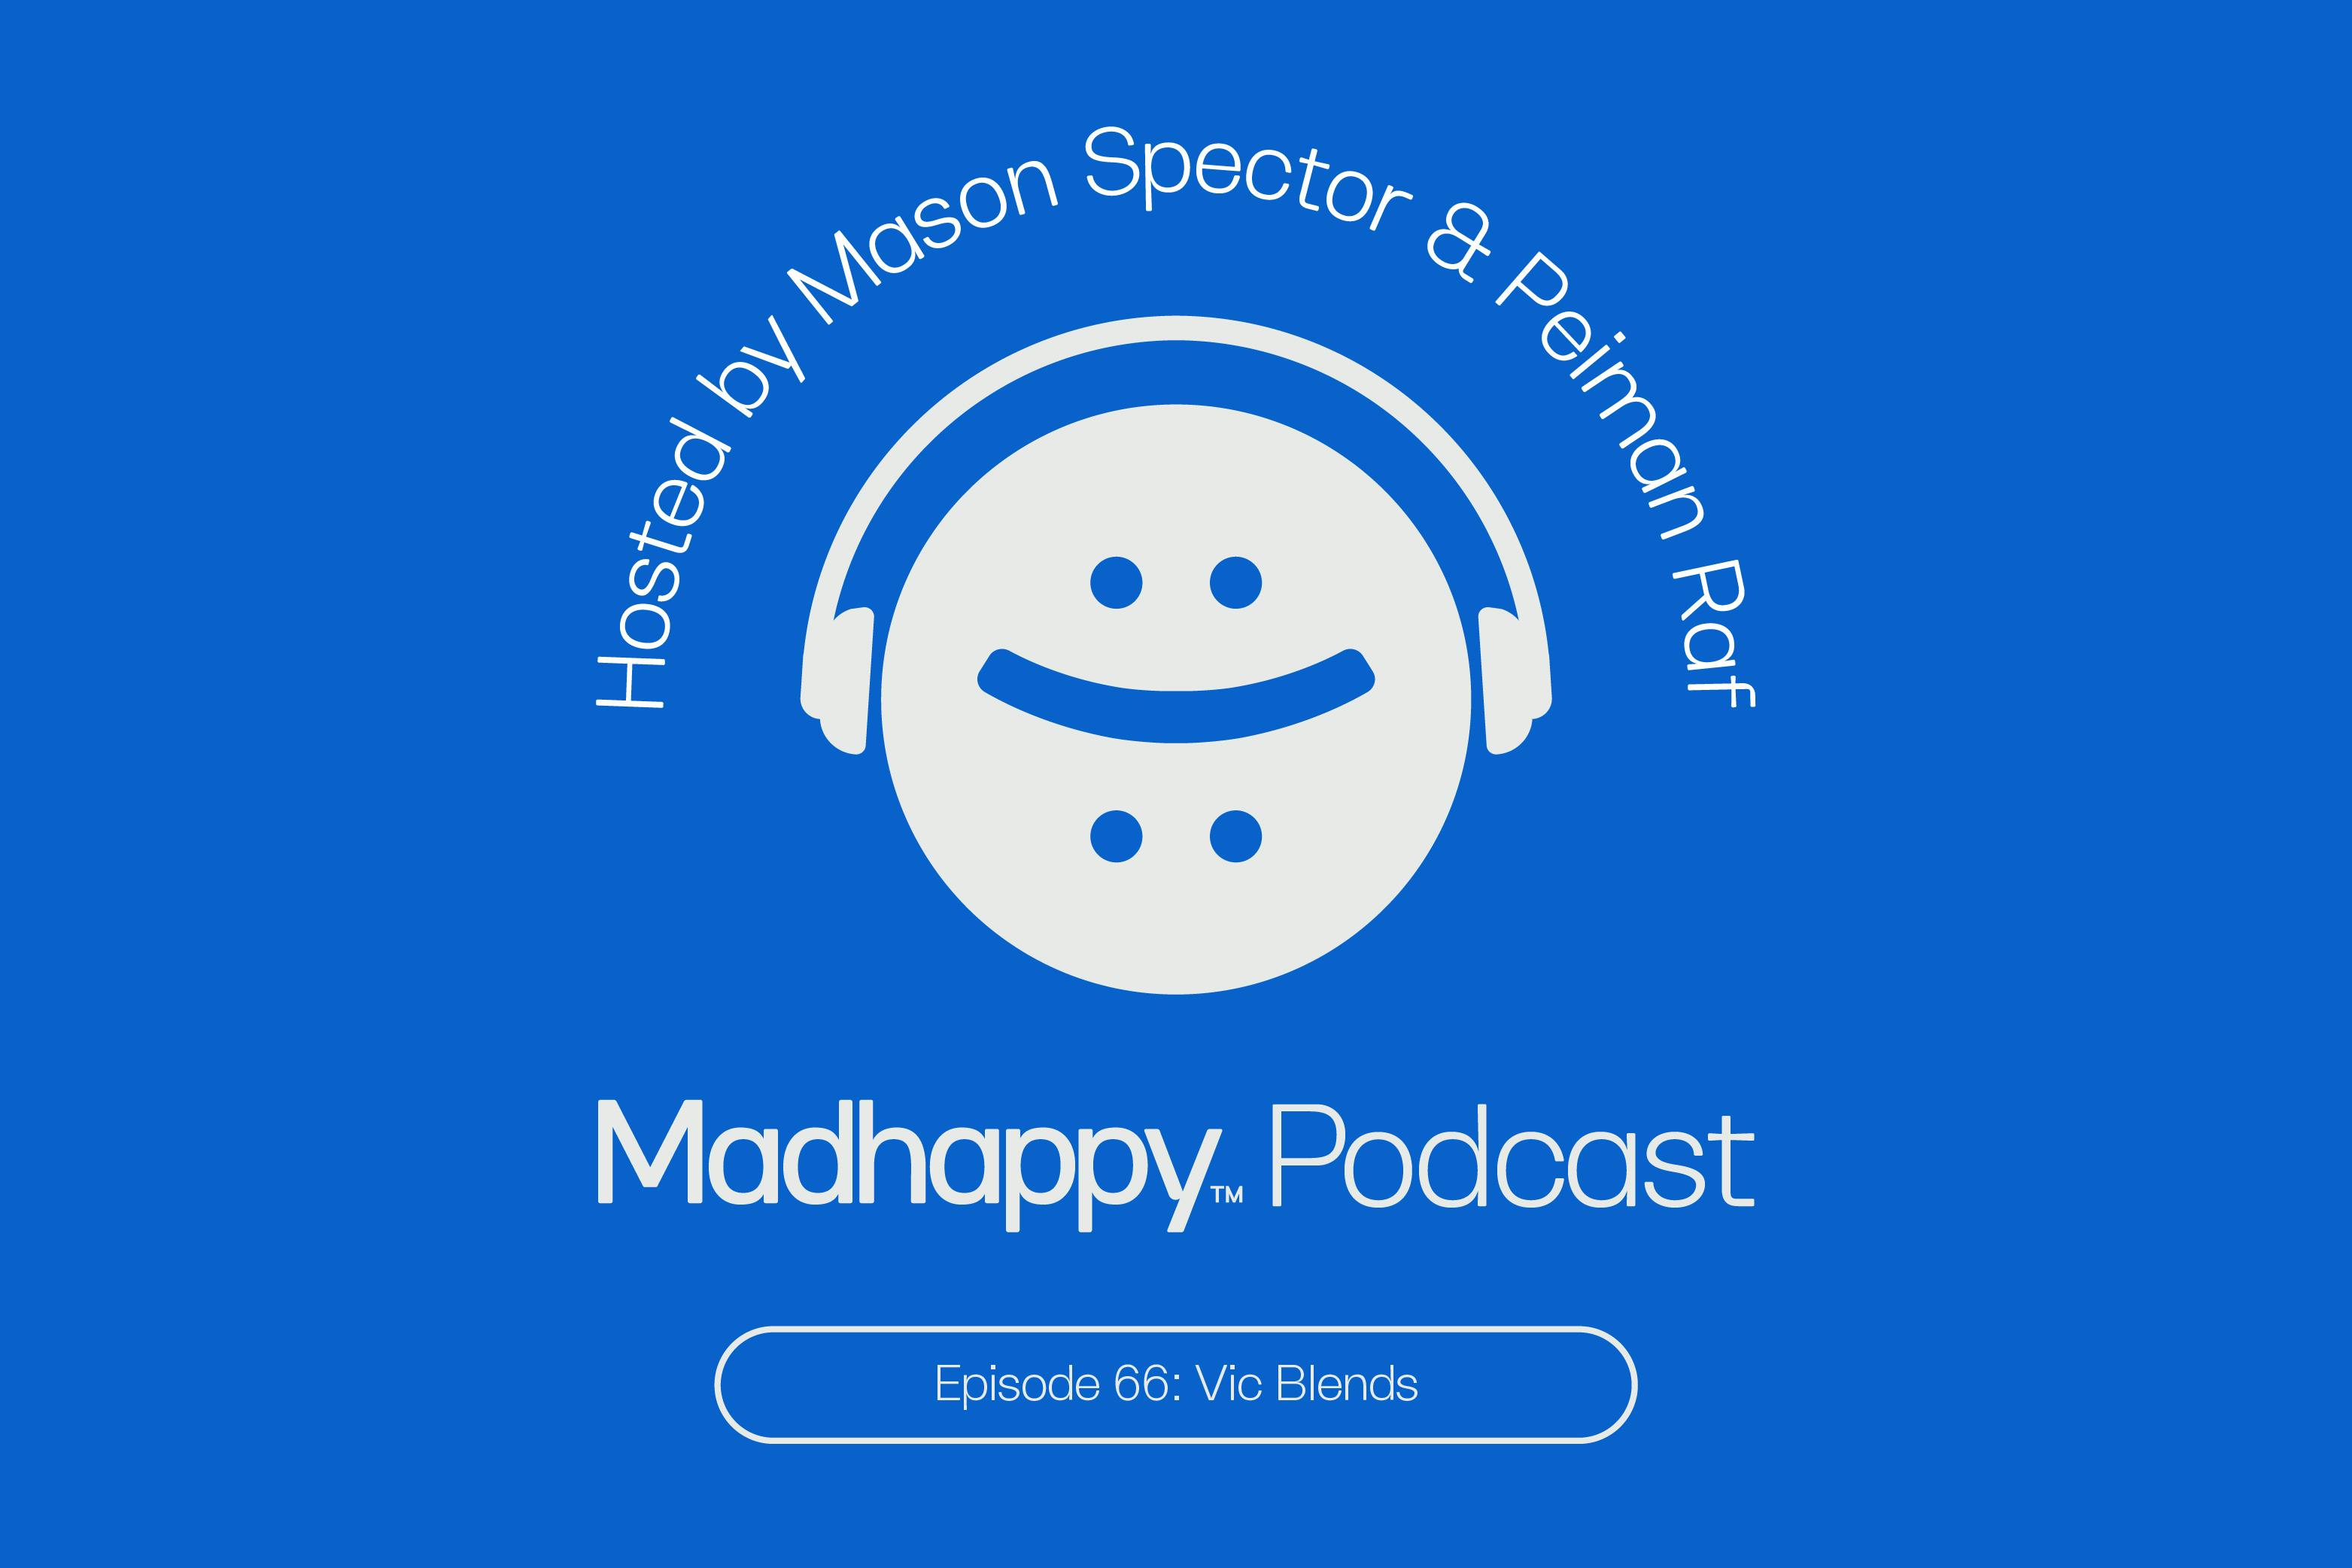 Episode 66: VicBlends on Optimism, Inspiration, and Impact